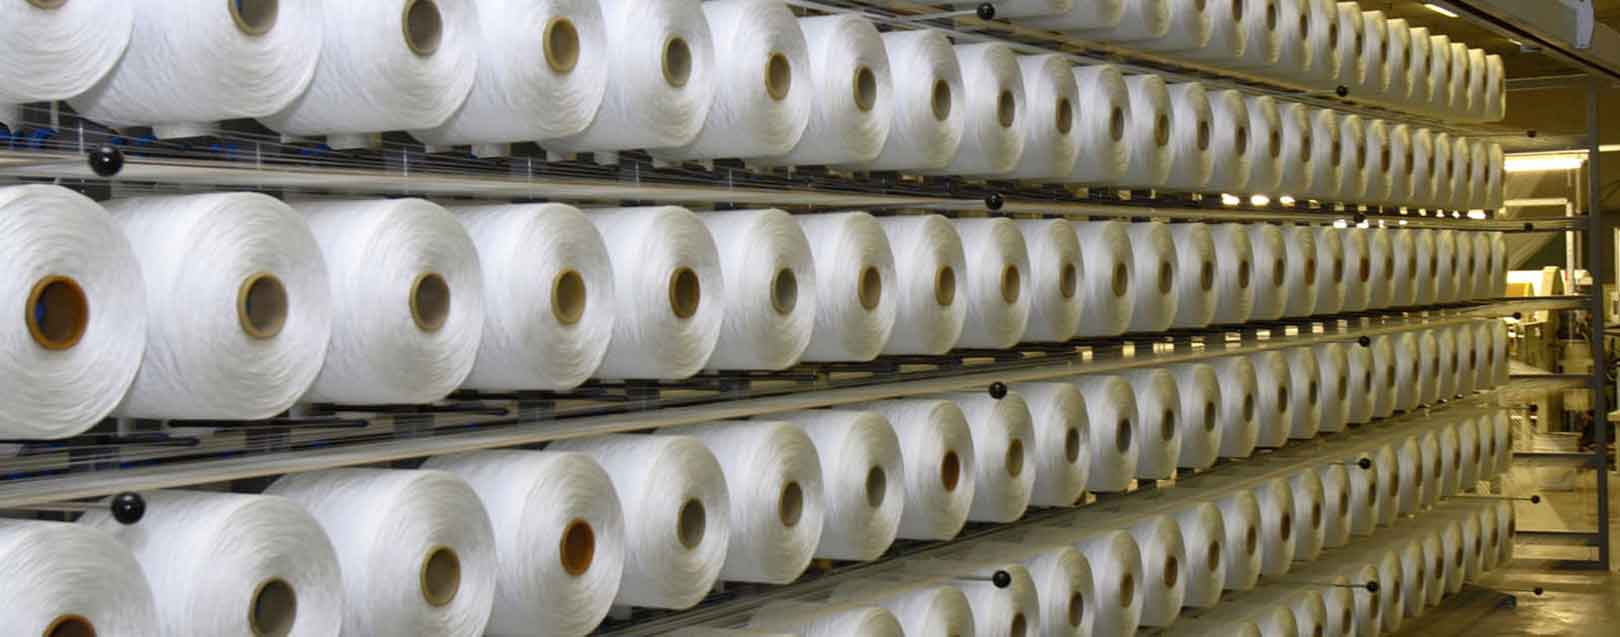 India’s textile exports remain flat in 2015-16